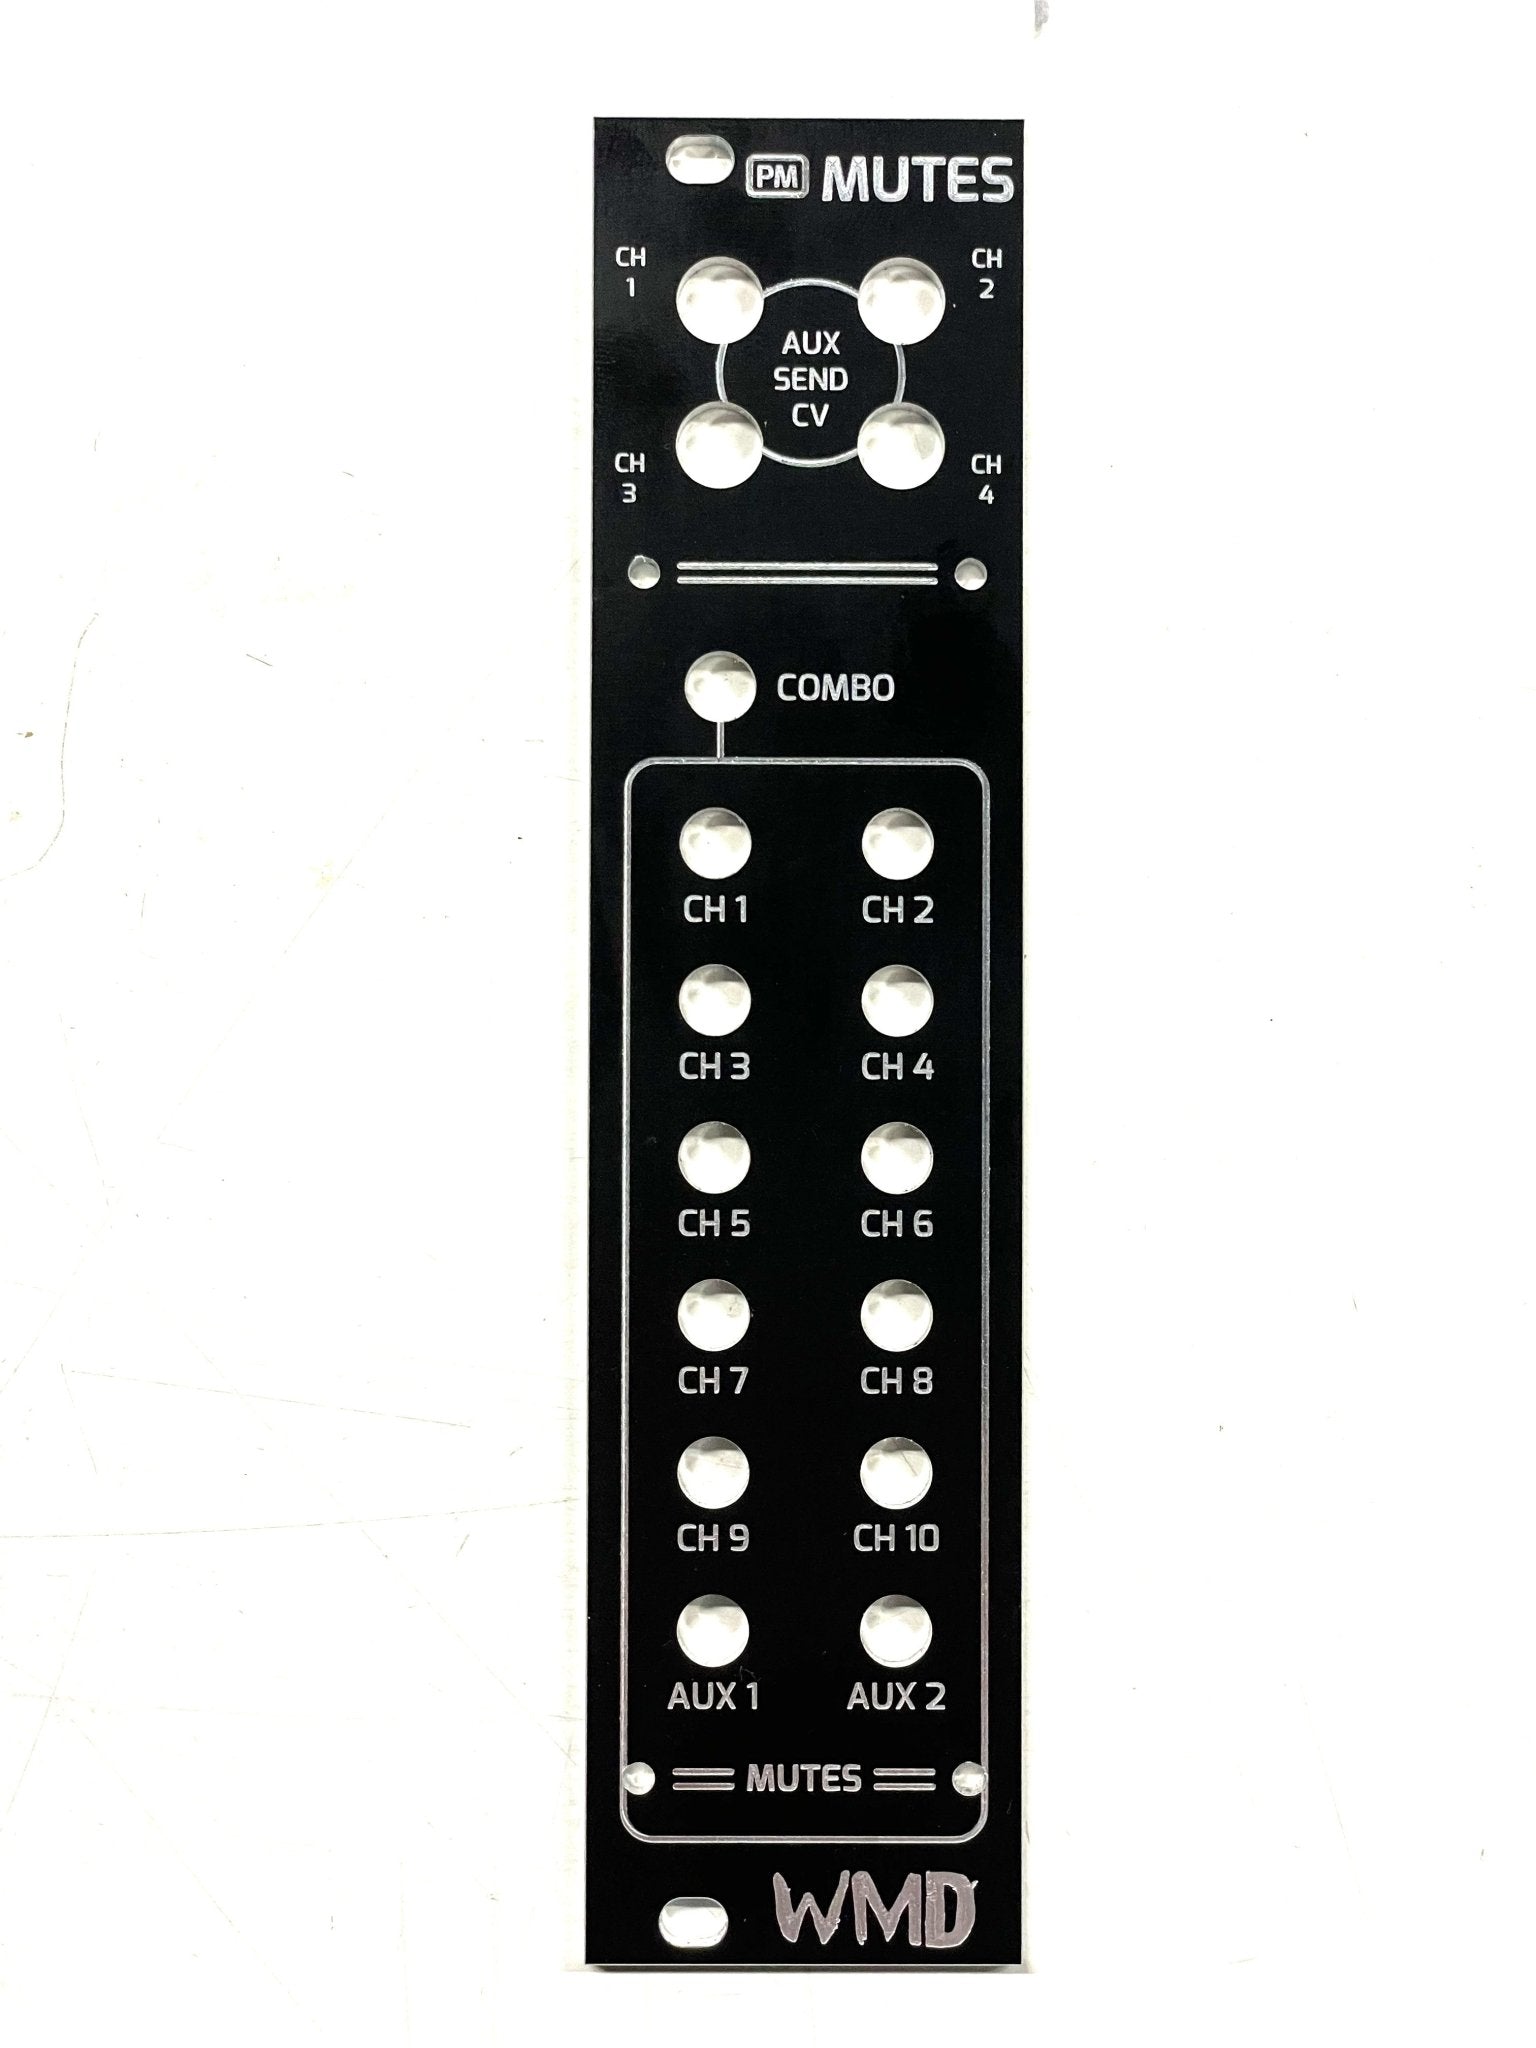 WMD - Modular Accessory - Black Panels for WMD Modules - WMD - PM Mutes - accessory - -